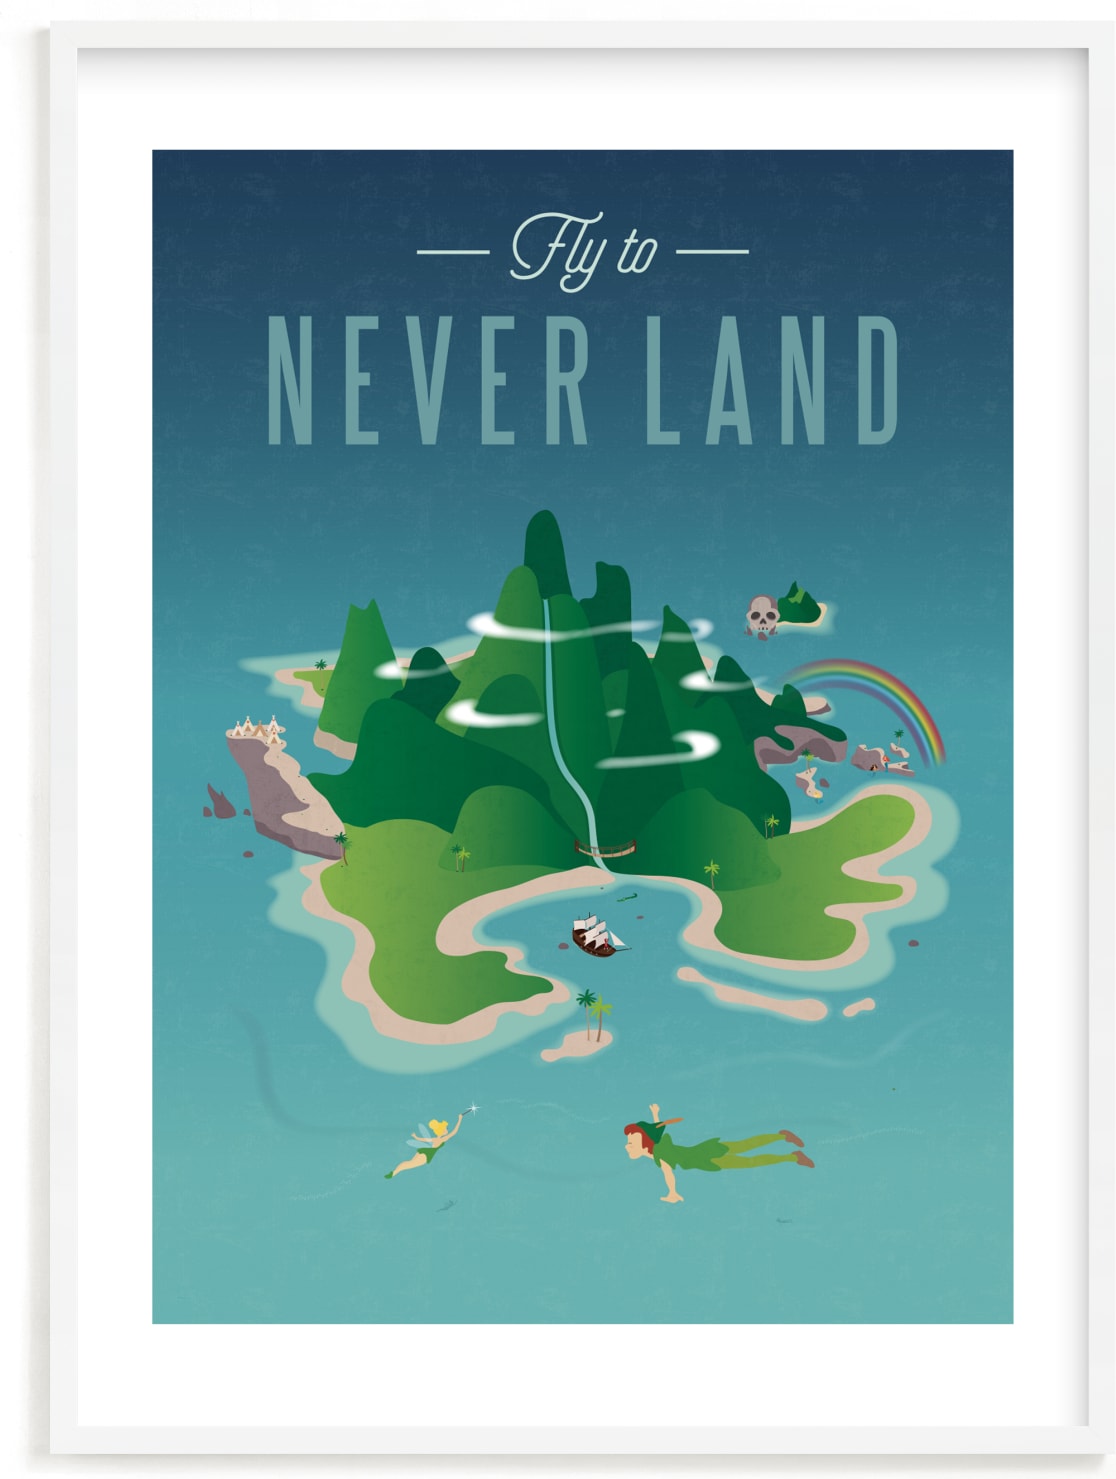 This is a blue disney art by Erica Krystek called Fly To Never Land from Disney's Peter Pan.